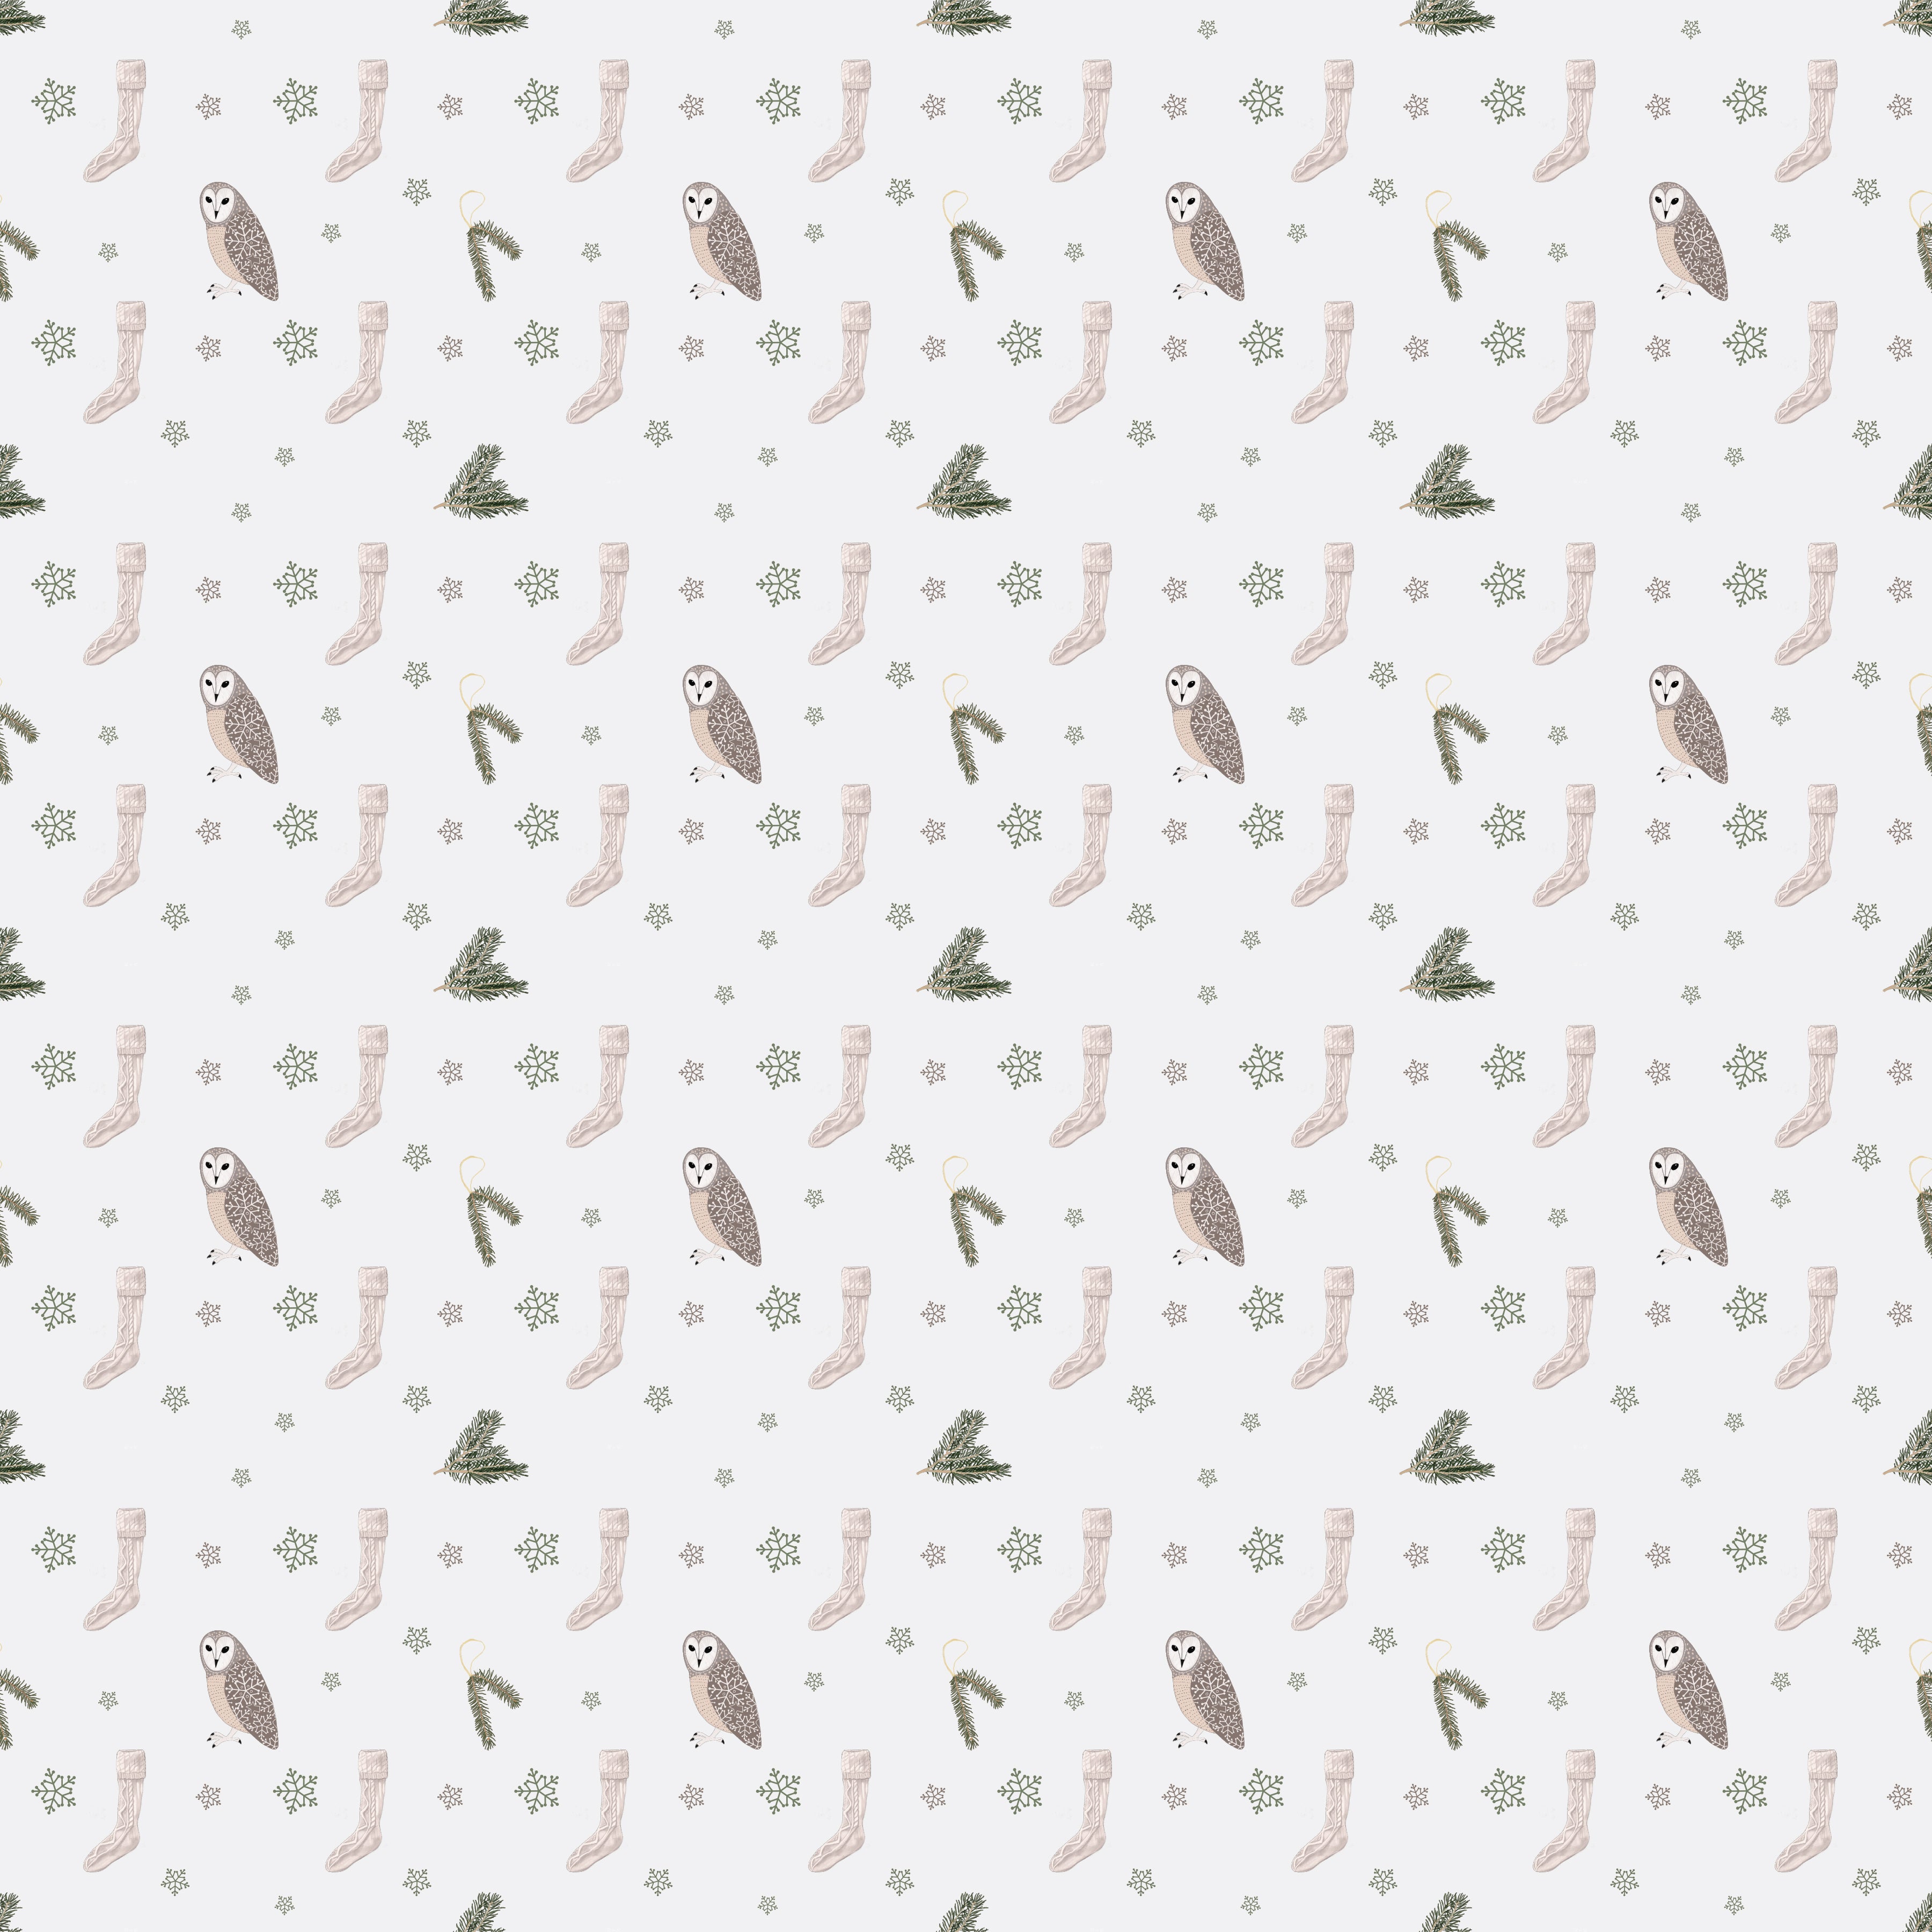 Easter Wrapping Paper - Waterleaf Paper Company